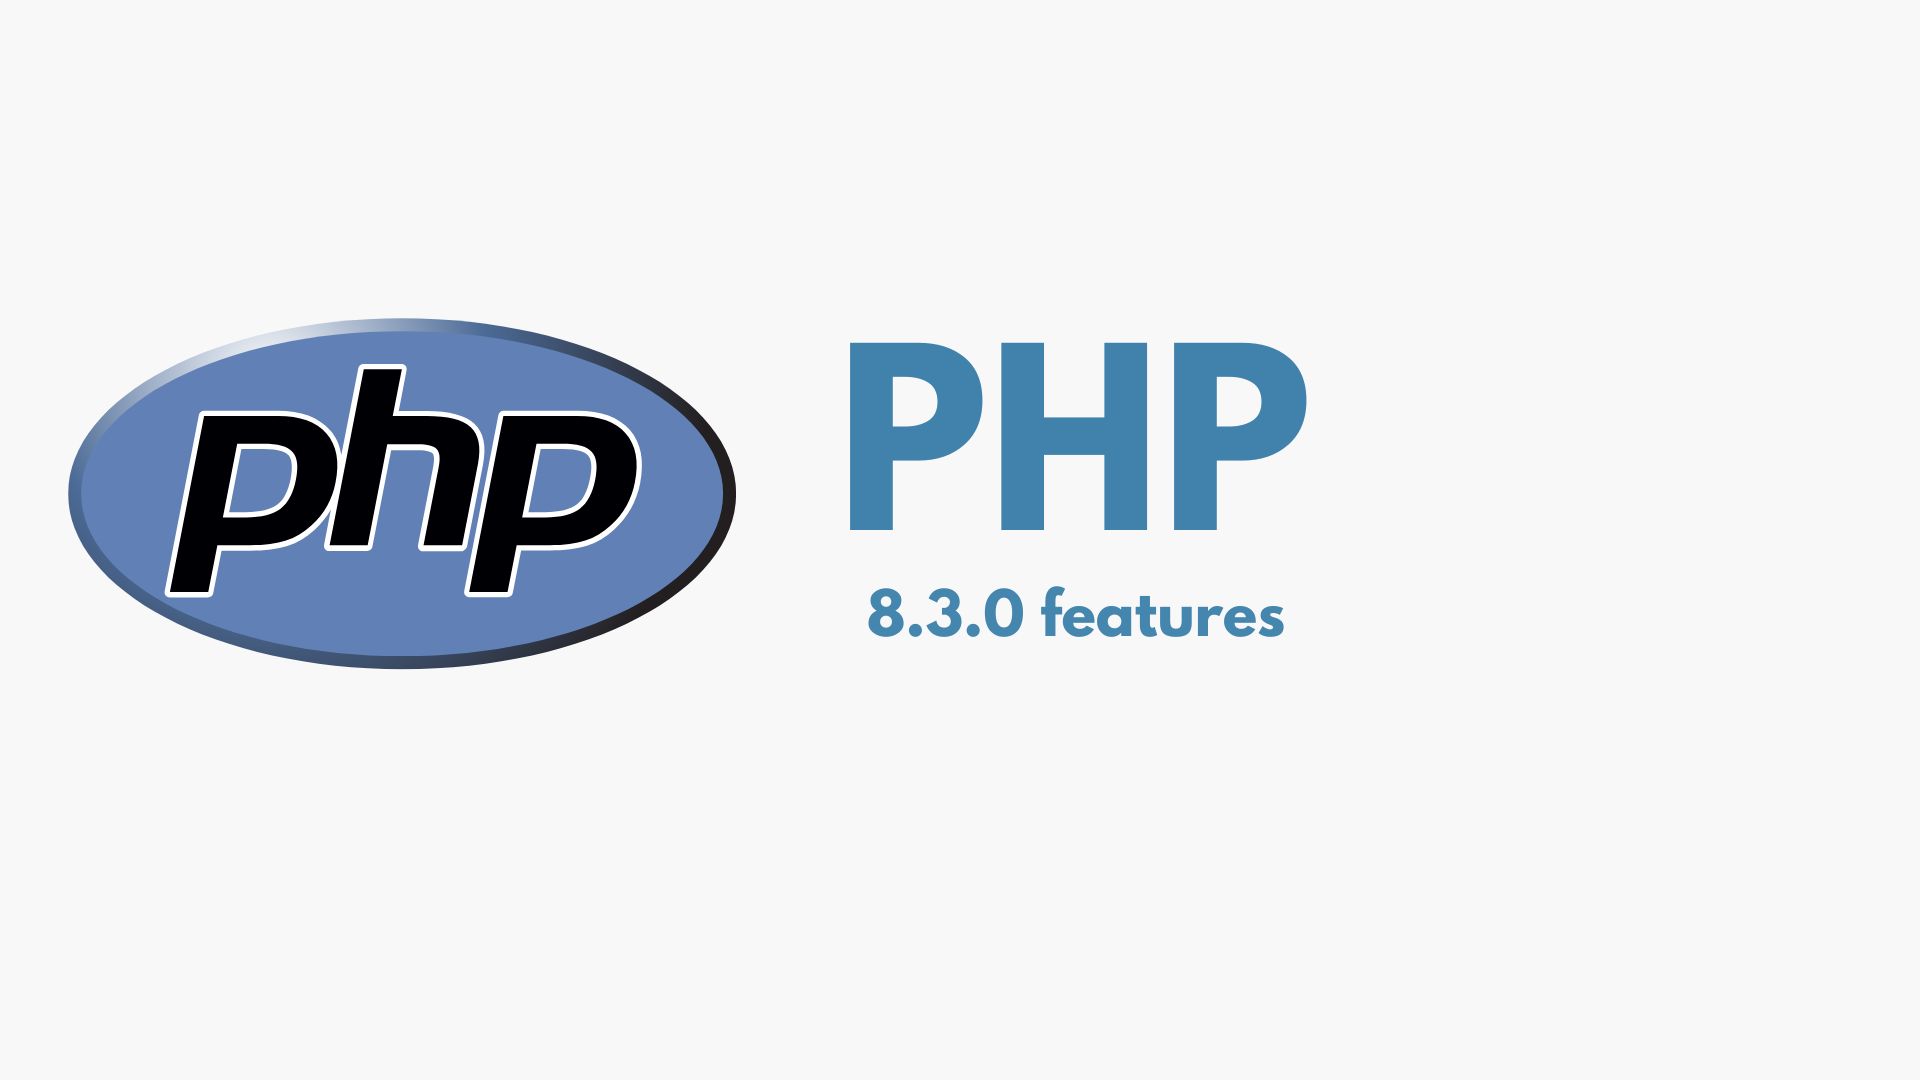 php 8.3.0 features